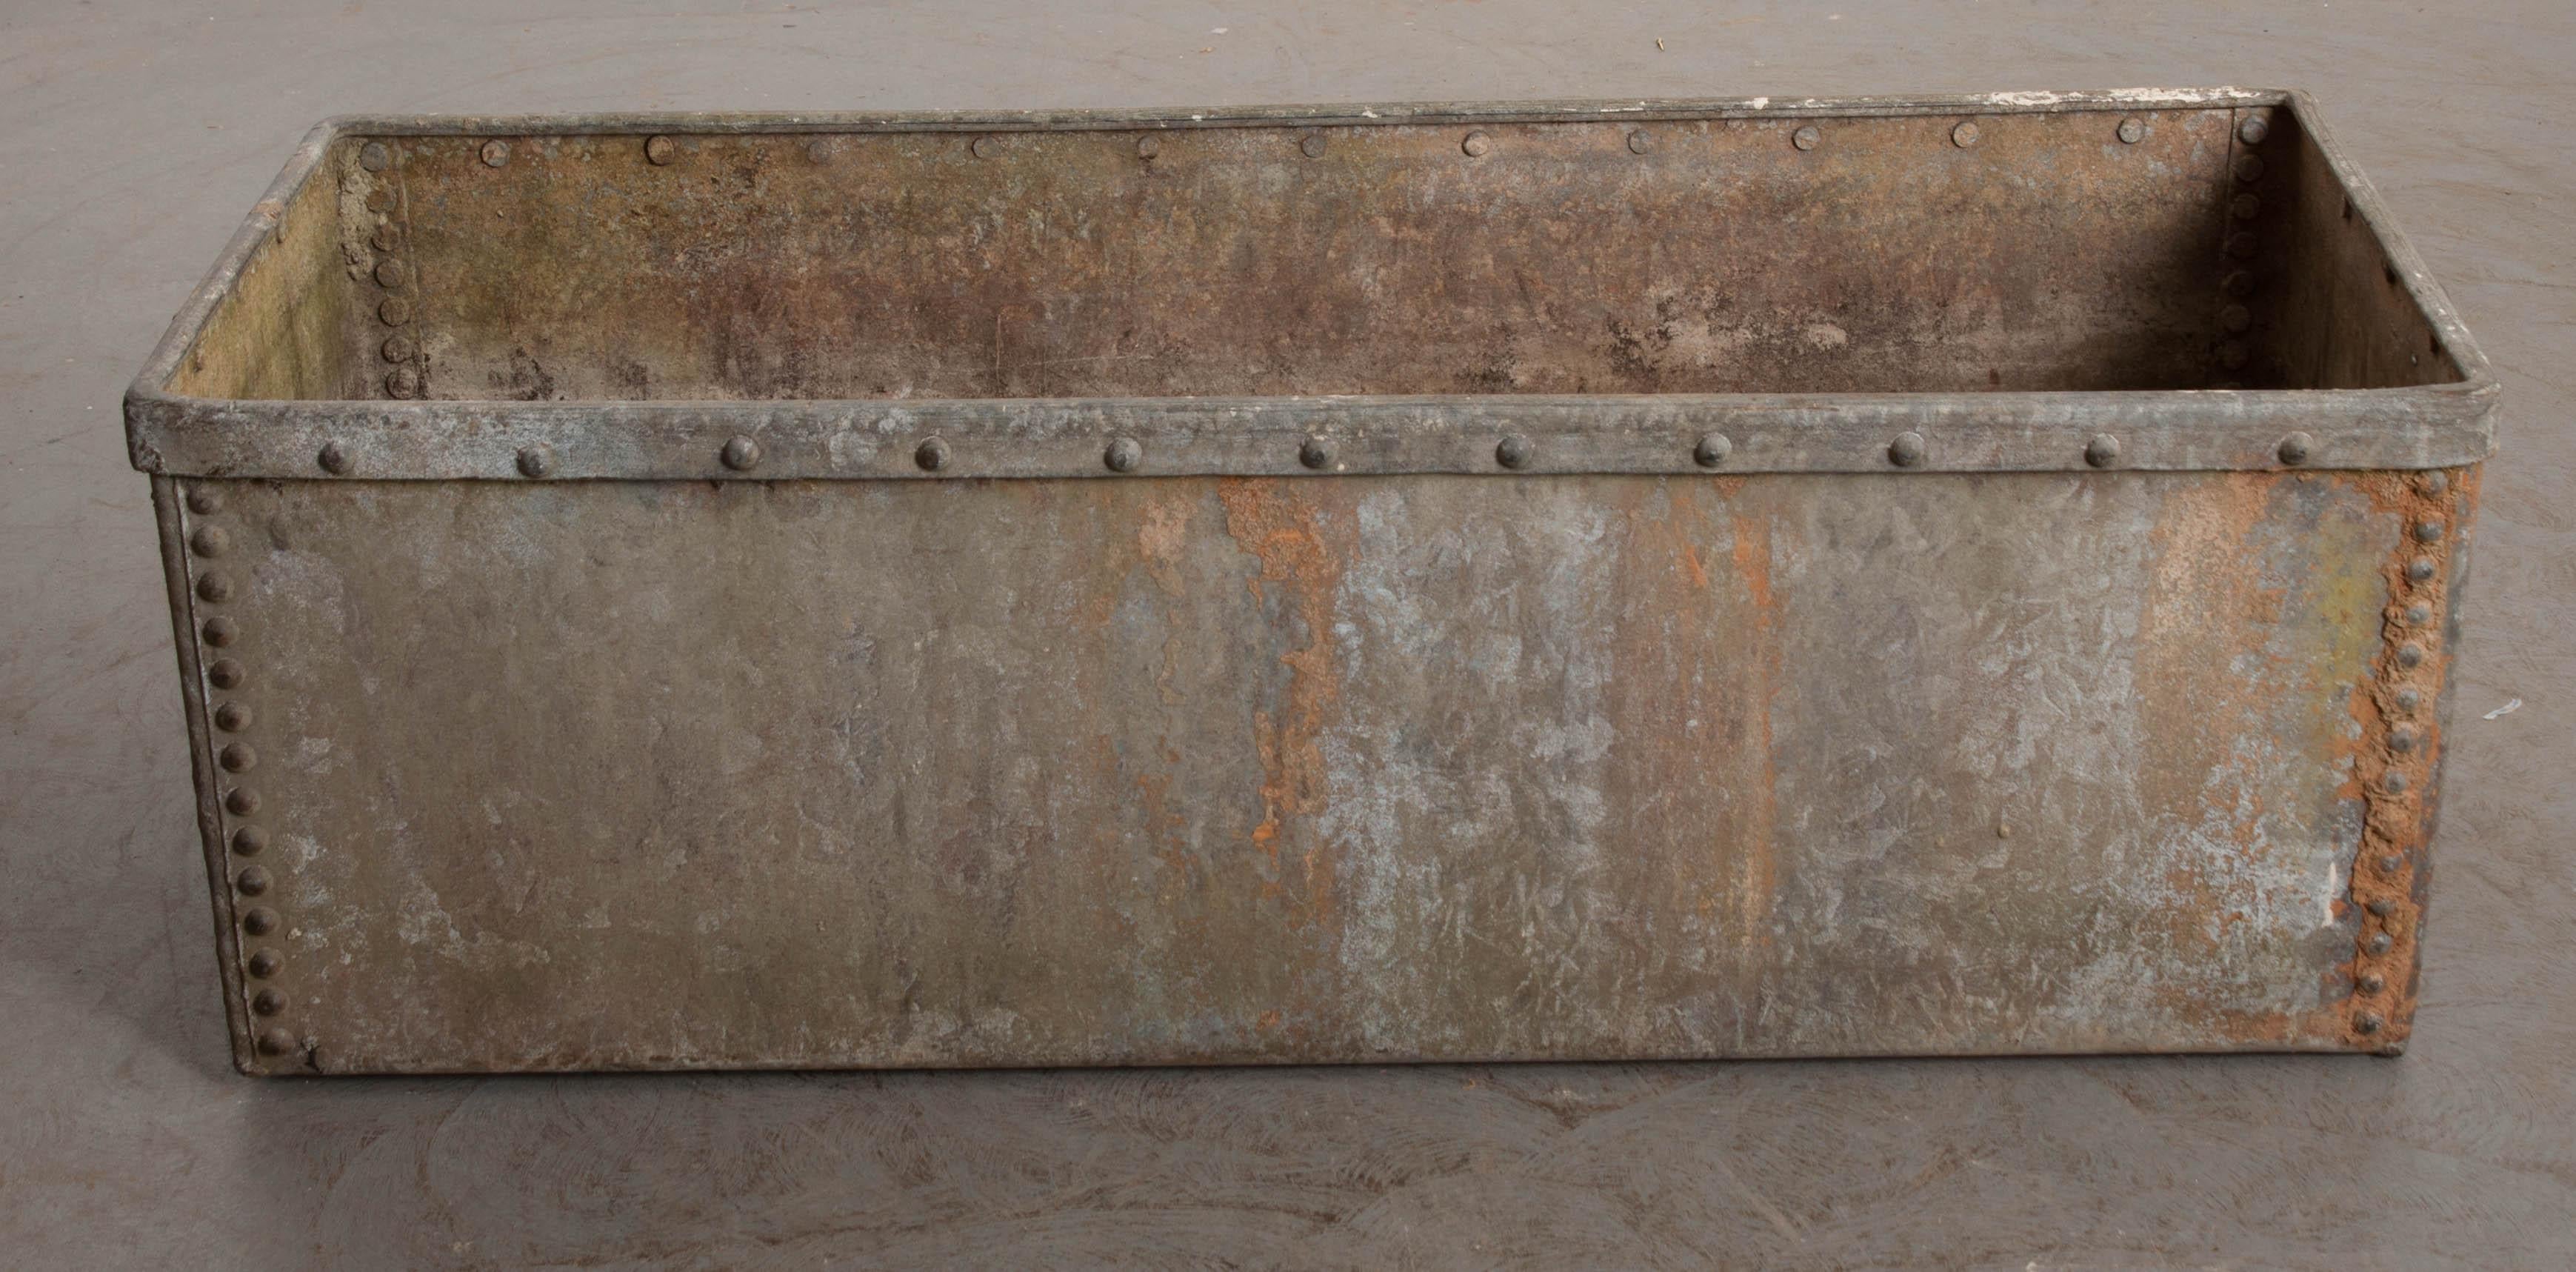 Make a big splash in your garden or outdoor space with this commanding zinc trough from 19th century England. This long and large metal receptacle would serve as a wonderful cachepot for your manicured shrubberies, topiaries or trees. It’s